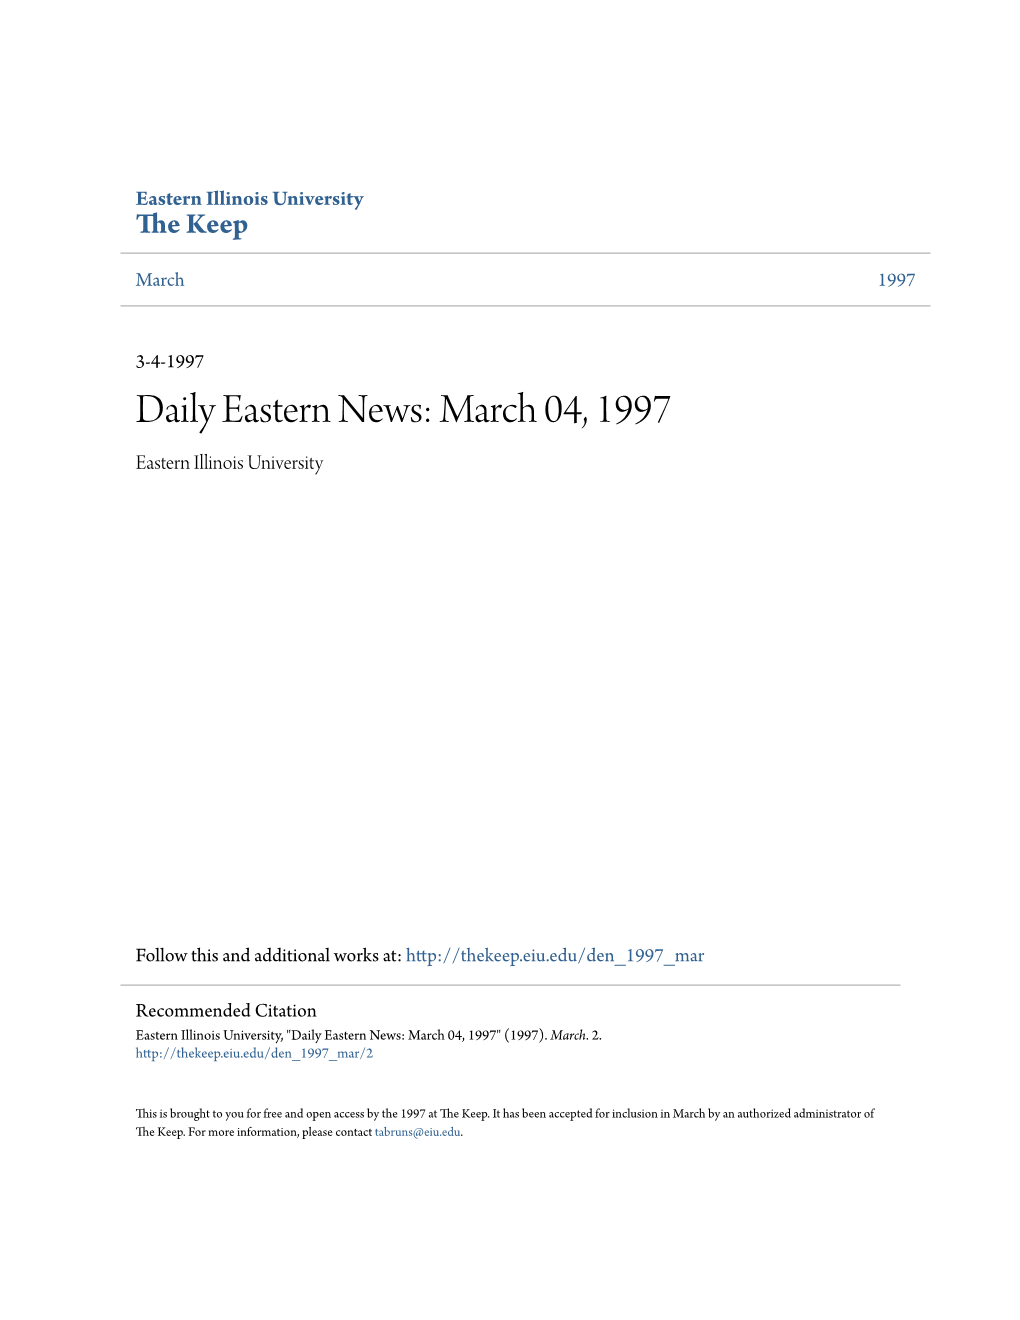 Daily Eastern News: March 04, 1997 Eastern Illinois University